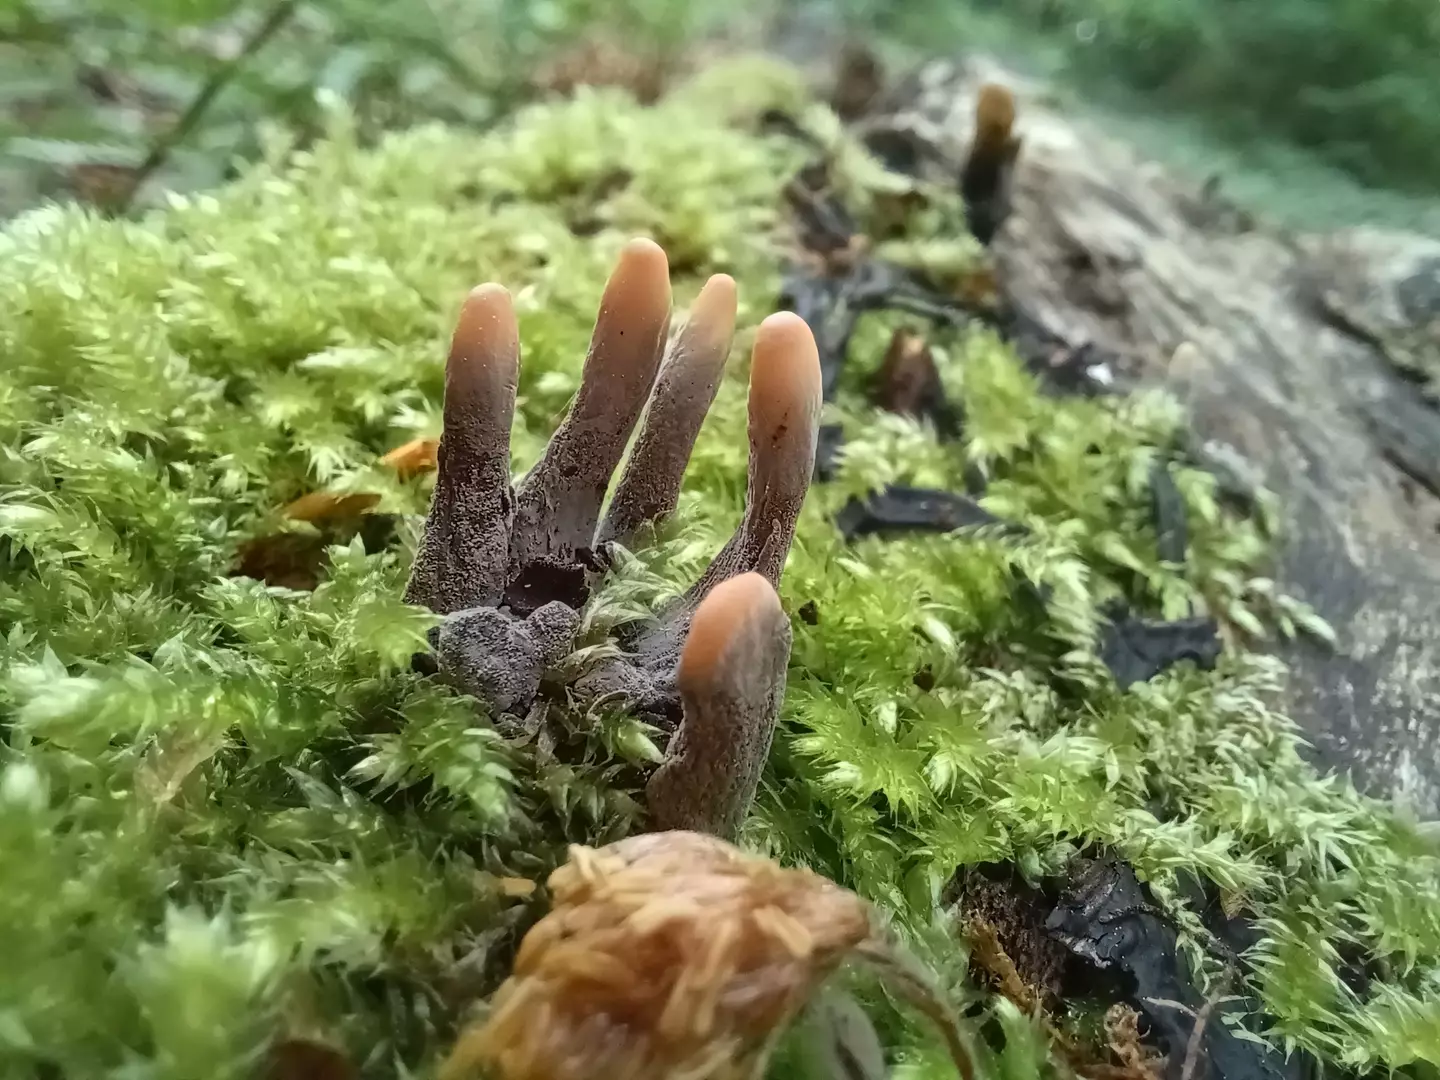 The 'zombie' mushroom-shaped hand was spotted in Wales.